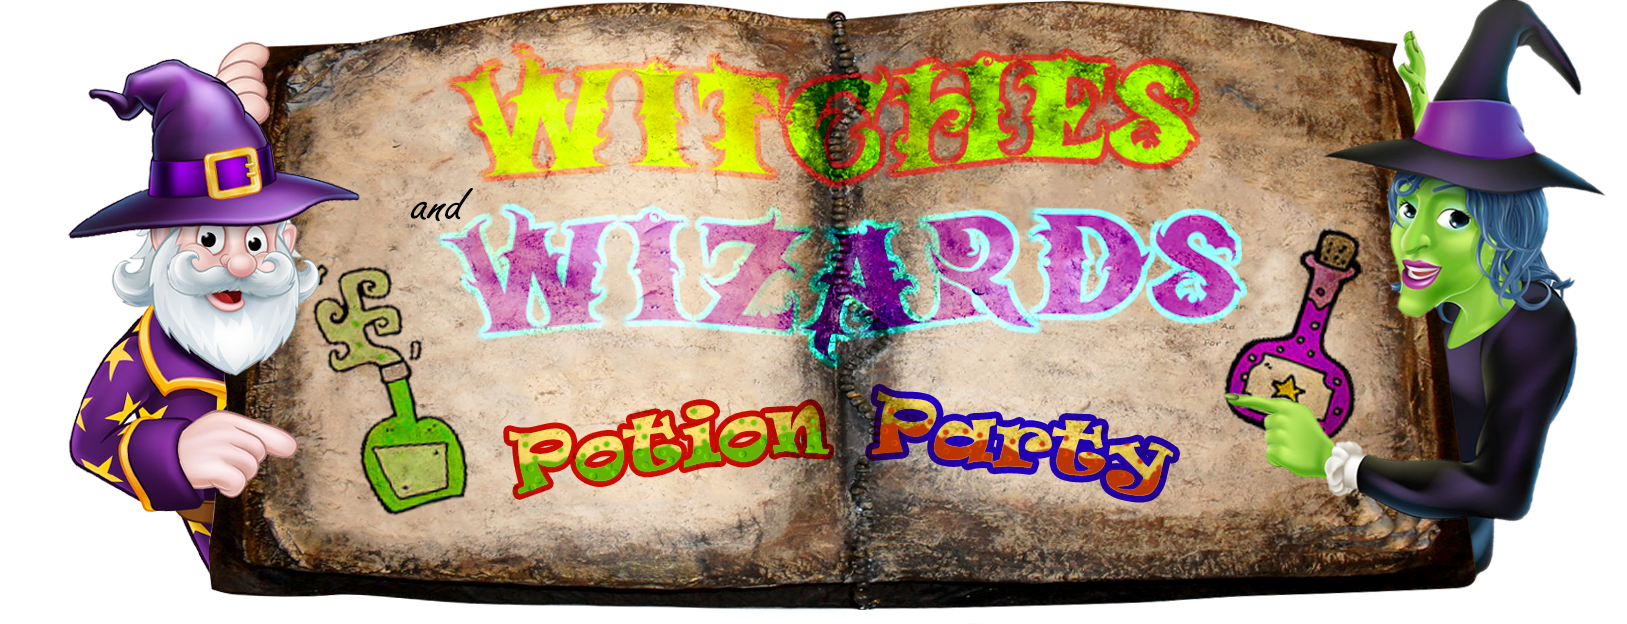 potion party image